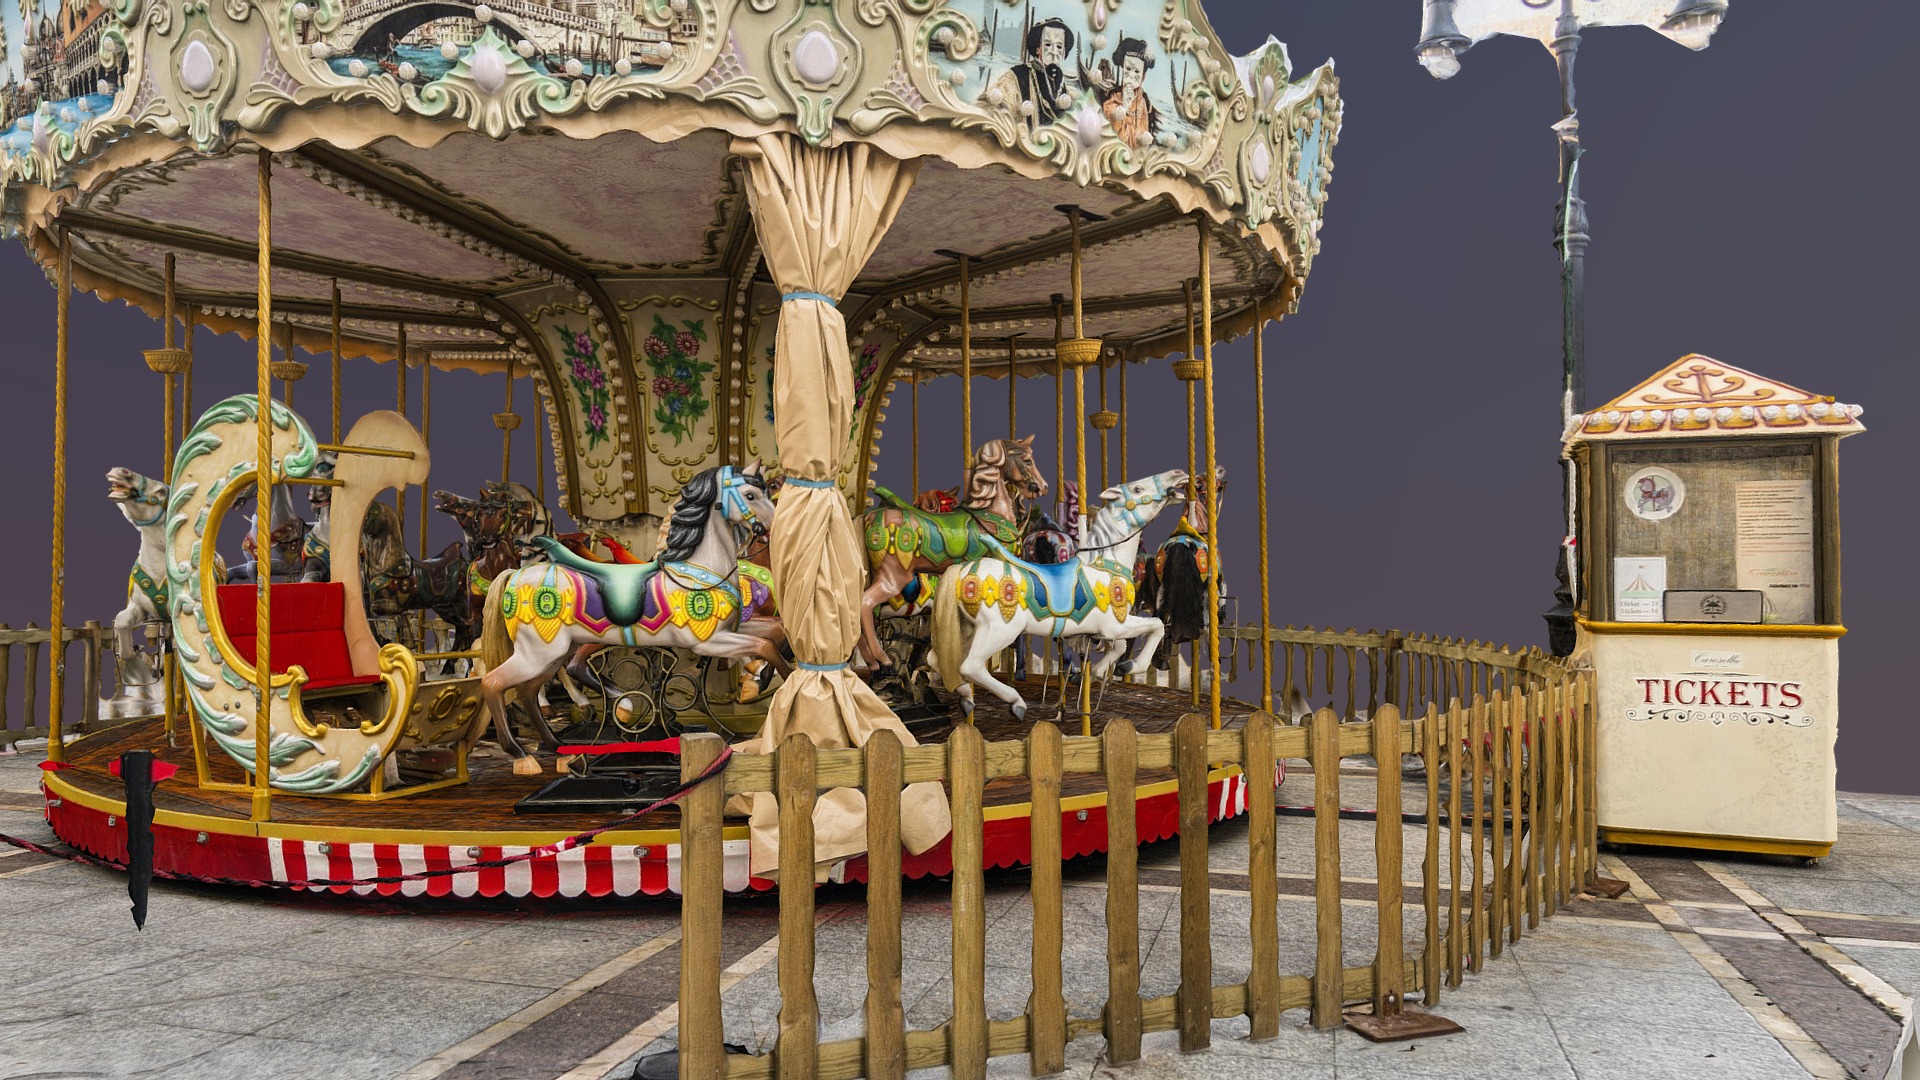 3D model Carousel with fence and ticket booth - This is a 3D model of the Carousel with fence and ticket booth. The 3D model is about a carousel with a clock.